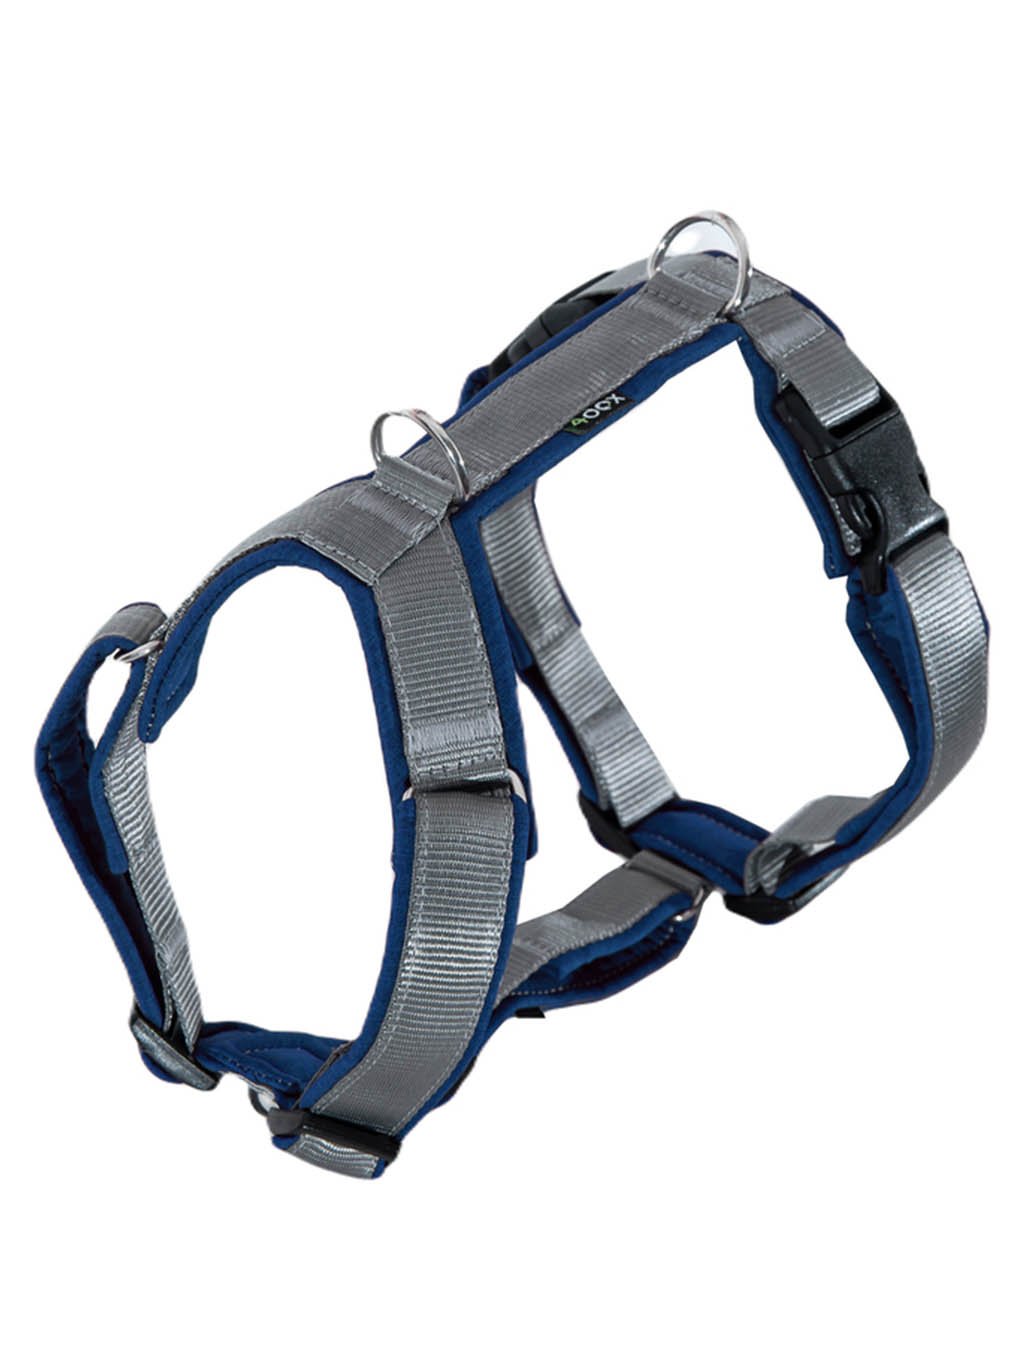 Comfort plus harness - silver - blueberry 4dox